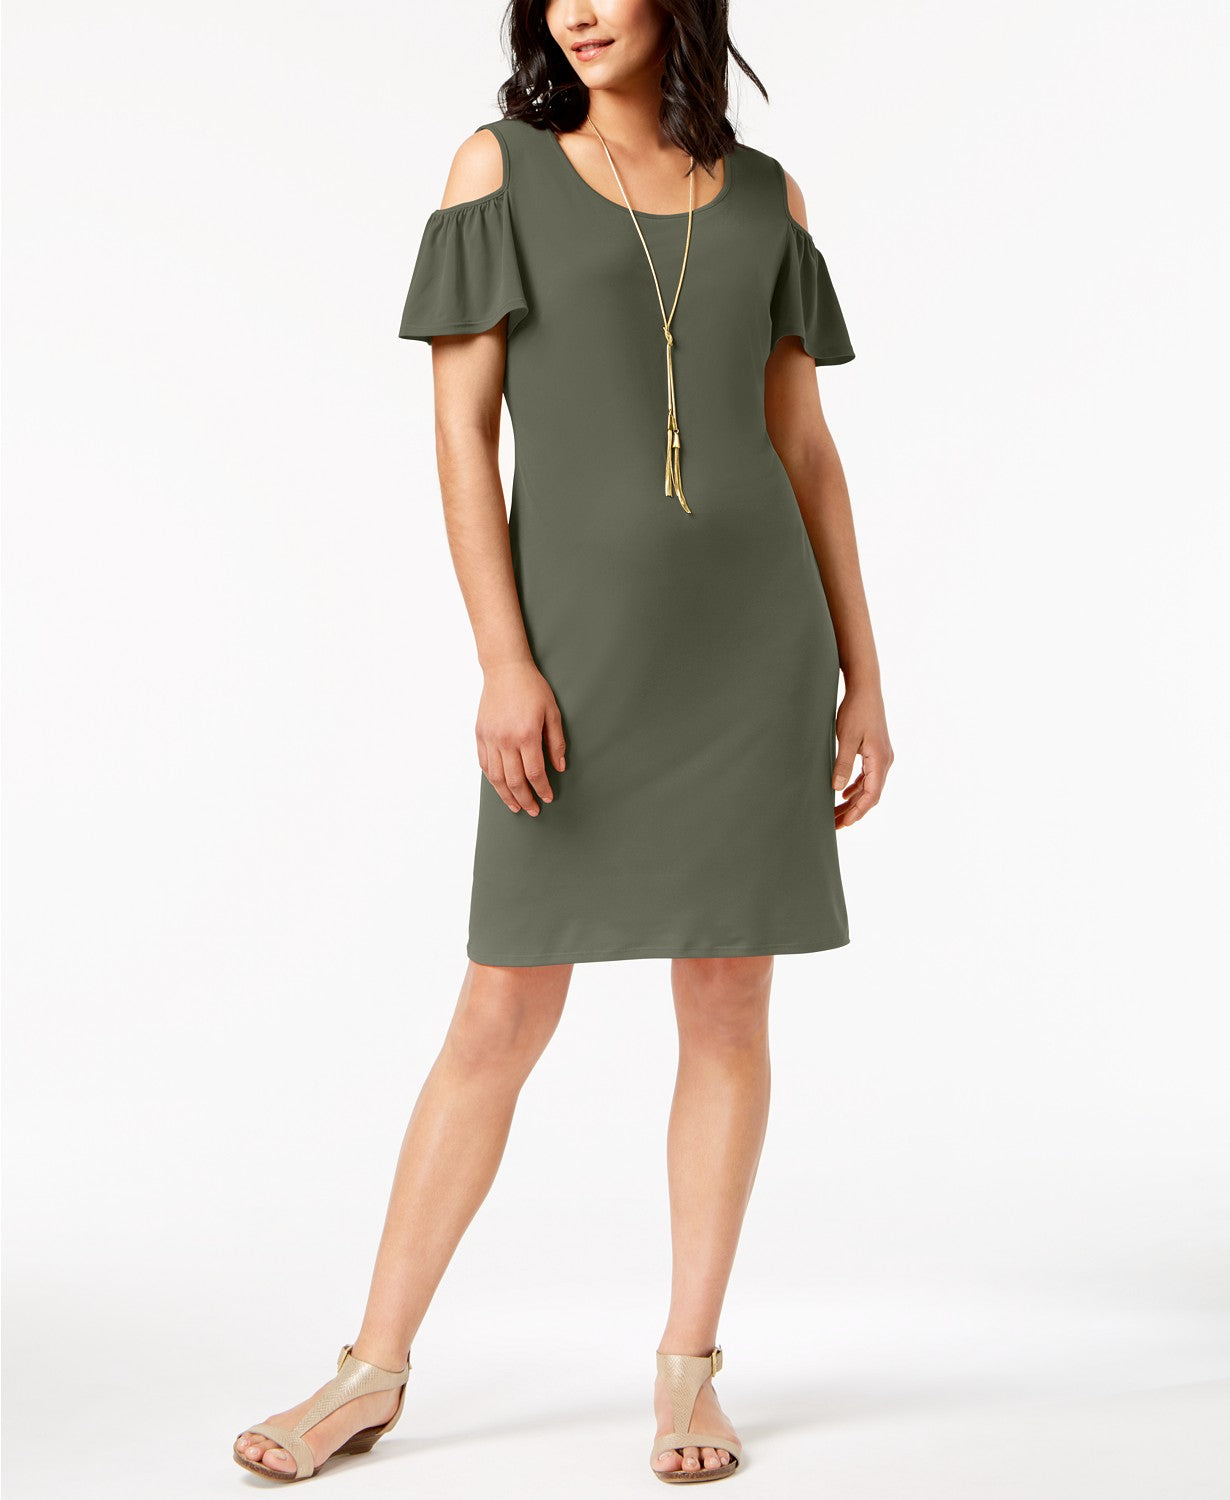 JM Collection Ity Dress With Necklace Green PM